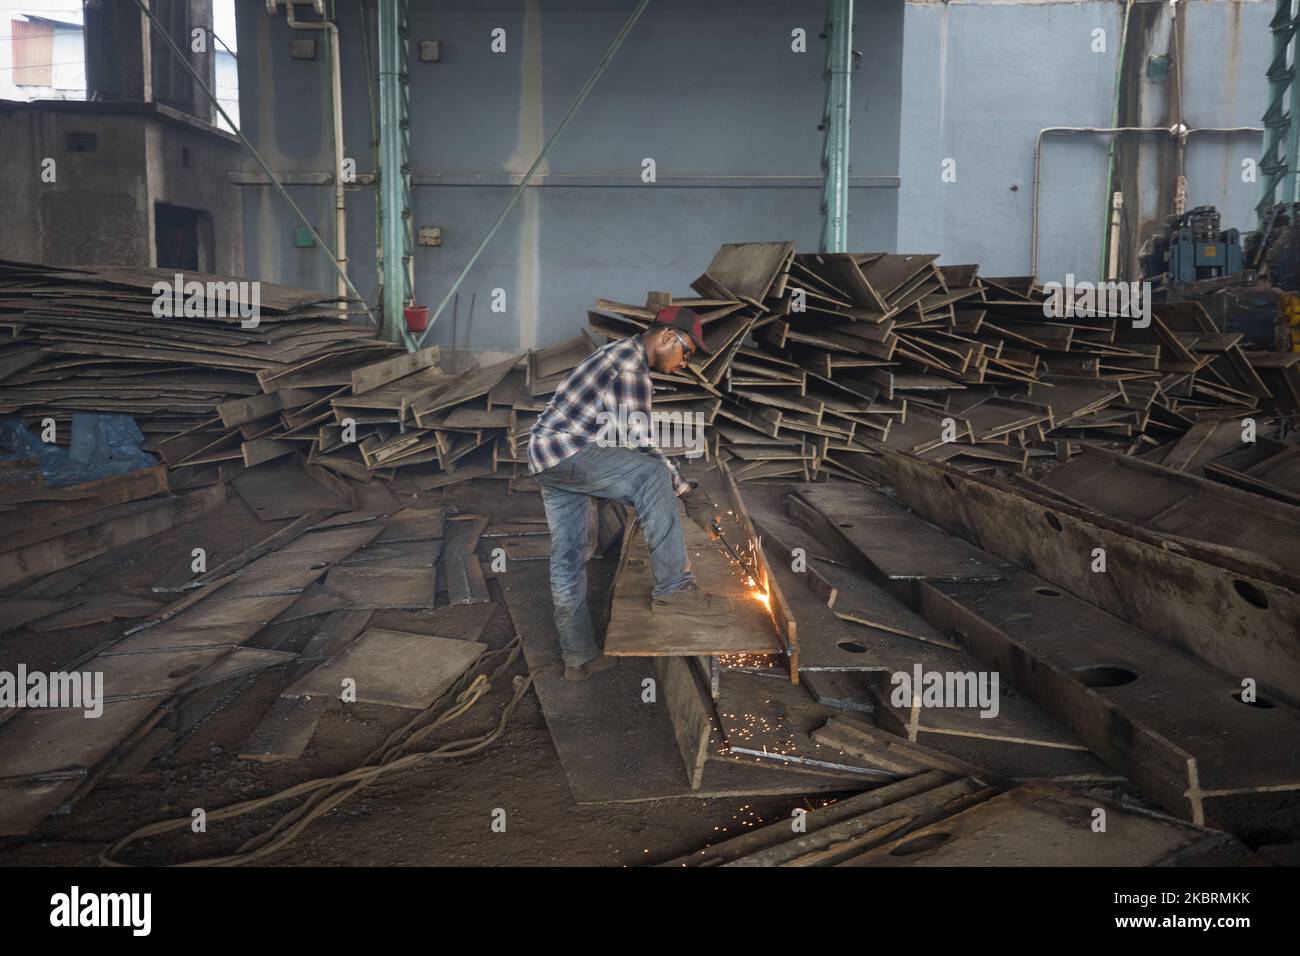 A Bangladeshi labourer welds in the steel re-rolling mills work without proper safety gear or tools in Narayanganj, Bangladesh on June 26, 2020. In these mills iron is forged in 1200 + to 1300+ Celsius. In such a heated place the soles of their shoes are likely to be burnt off with one careless step. (Photo by Ahmed Salahuddin/NurPhoto) Stock Photo